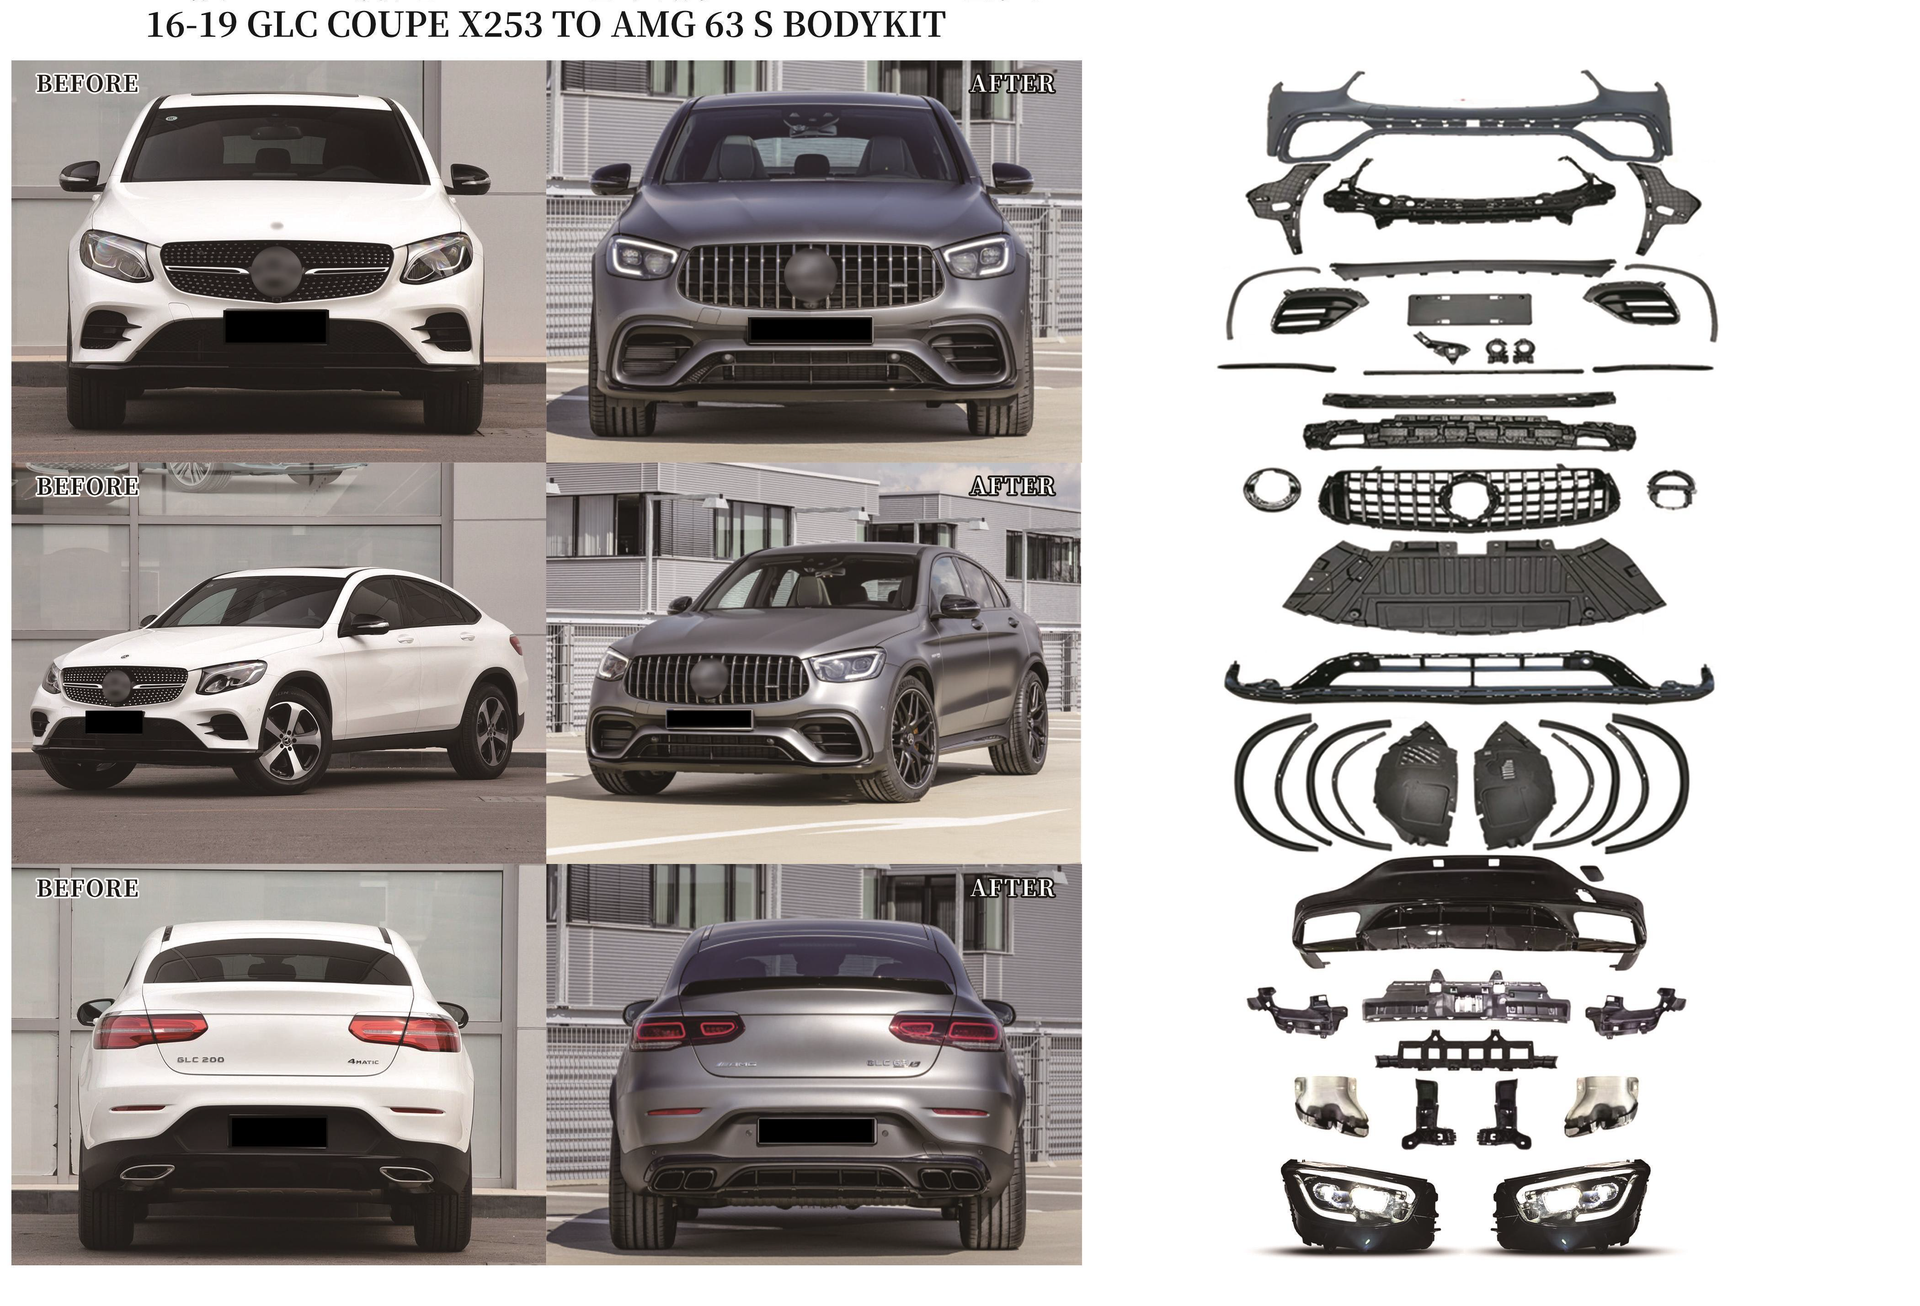 Mercedes GLC Coupe X253 2016-2019 to AMG 63 S Body Kit Conversion